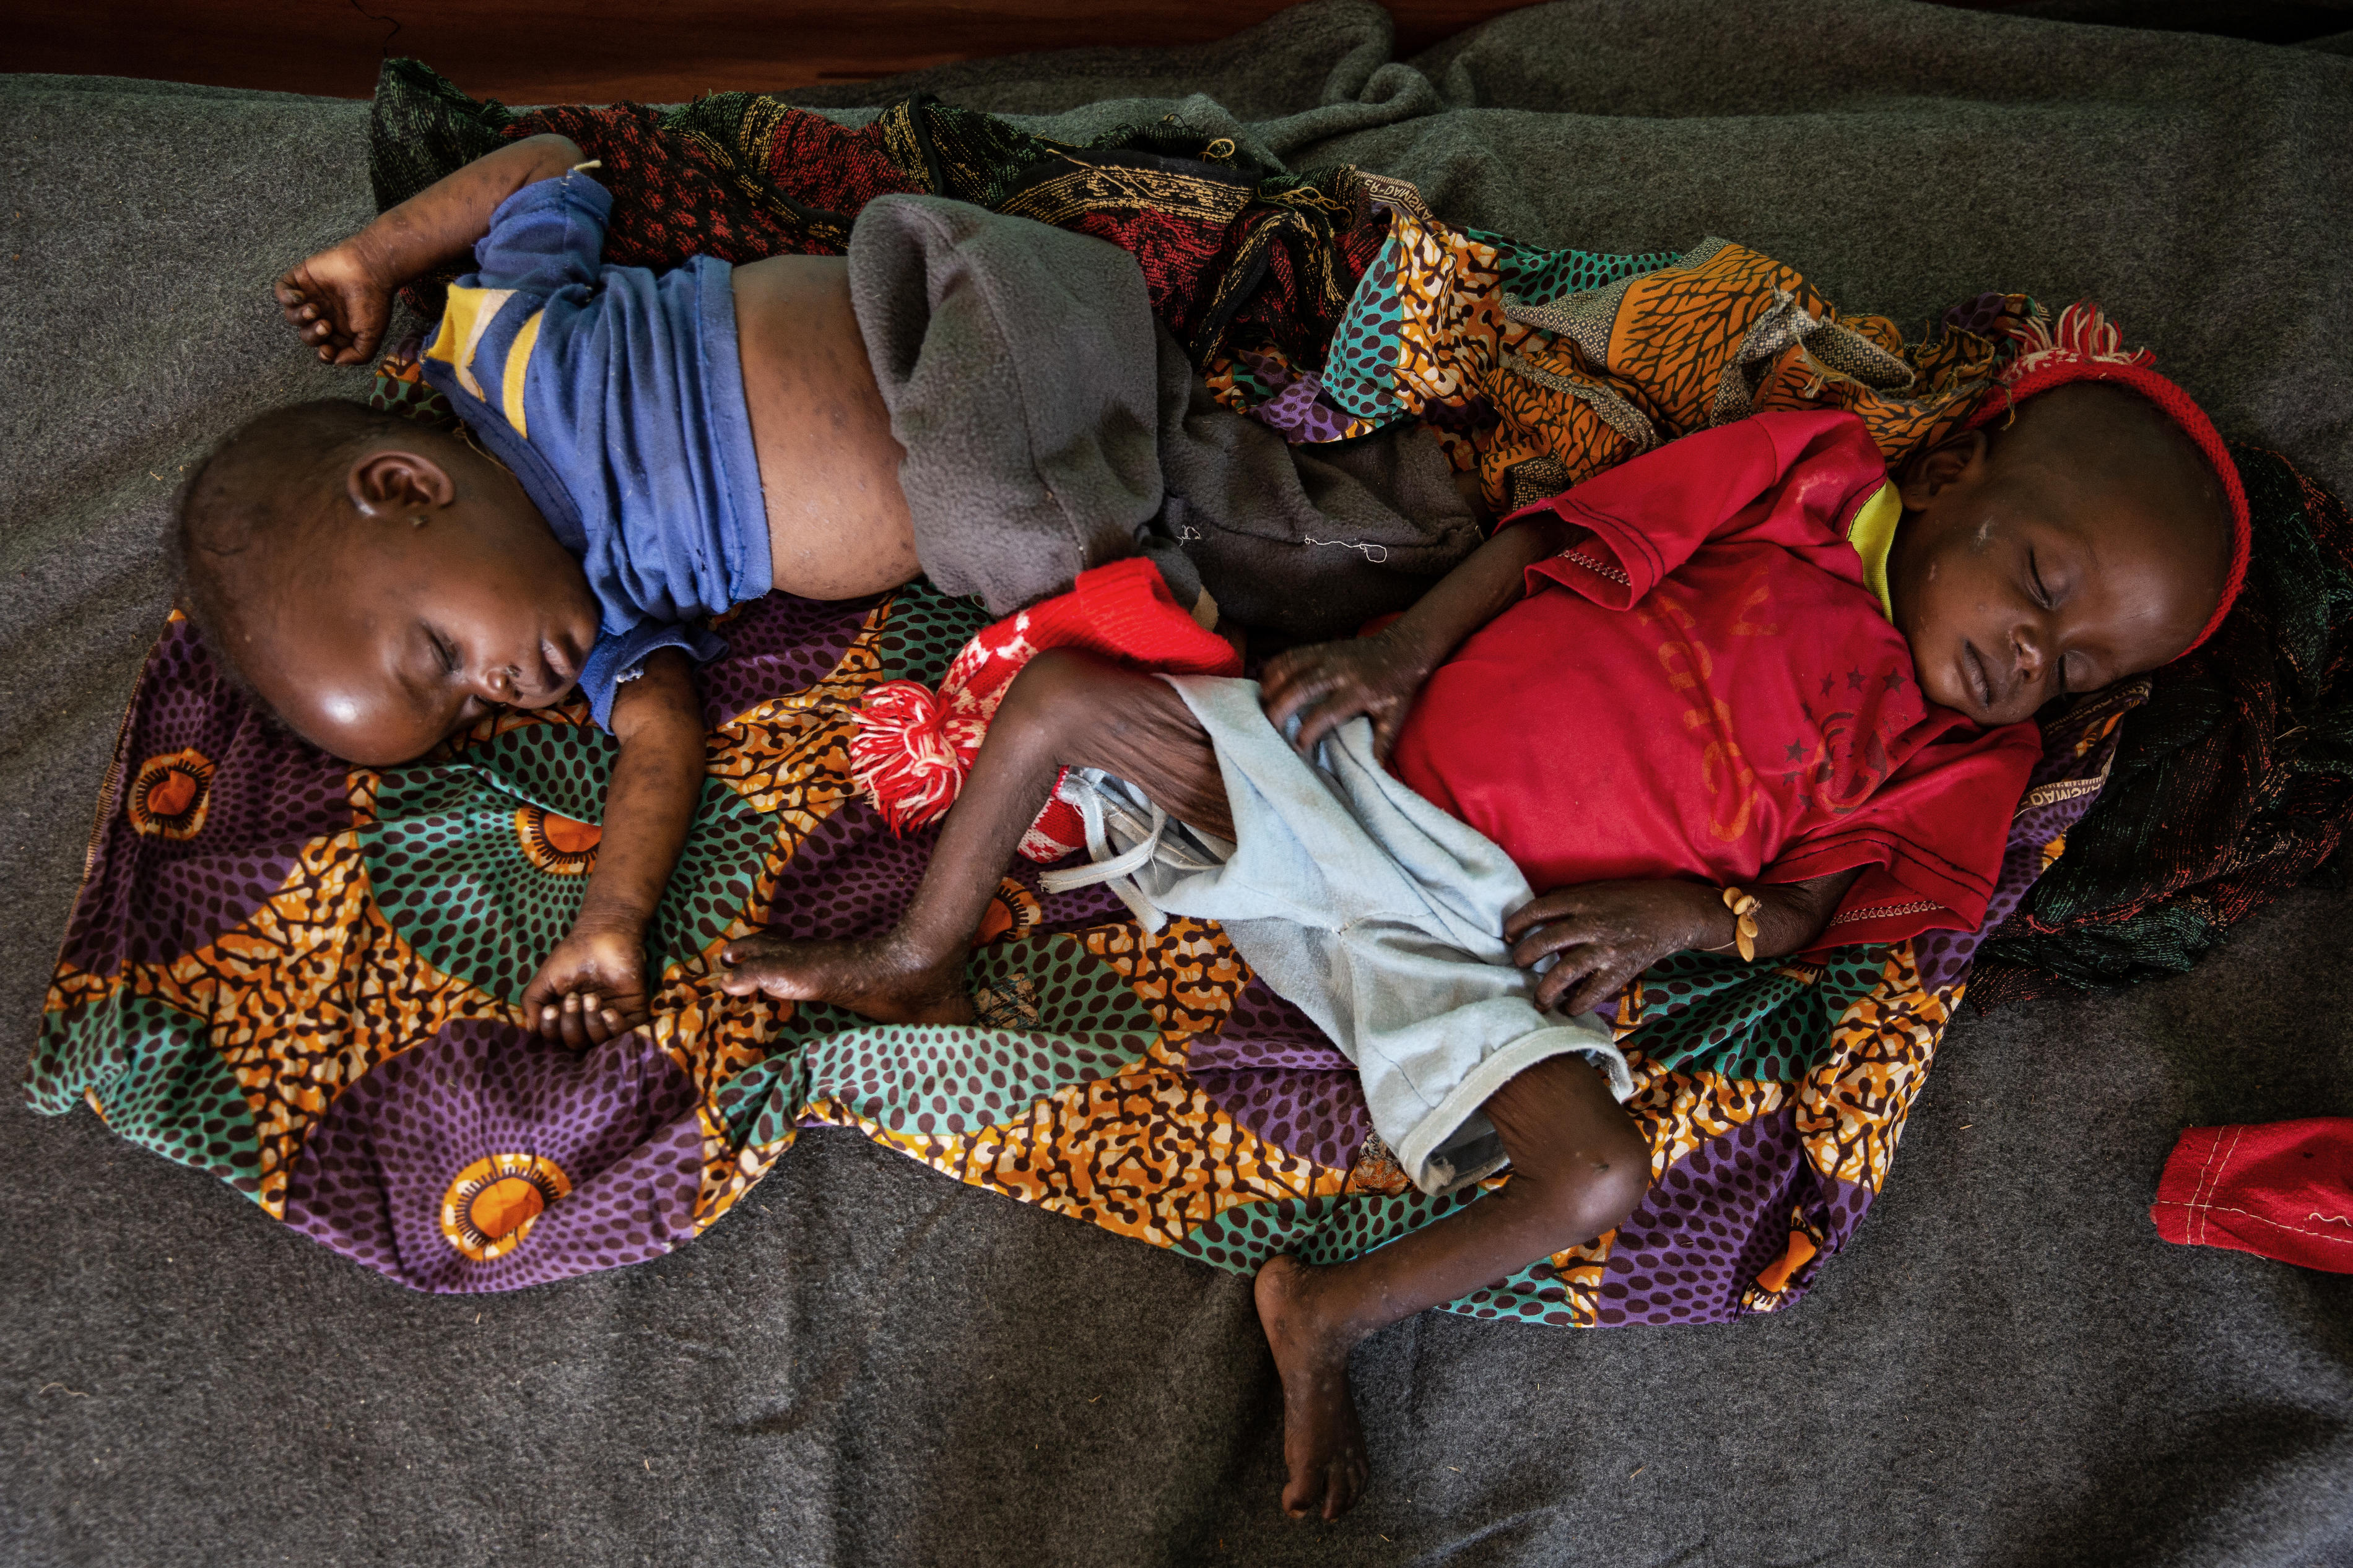 Twins Elisabeth and Sophie, were first treated for measles and then for acute malnutrition at the MSF-supported pediatric unit at the Baboua district Hospital.